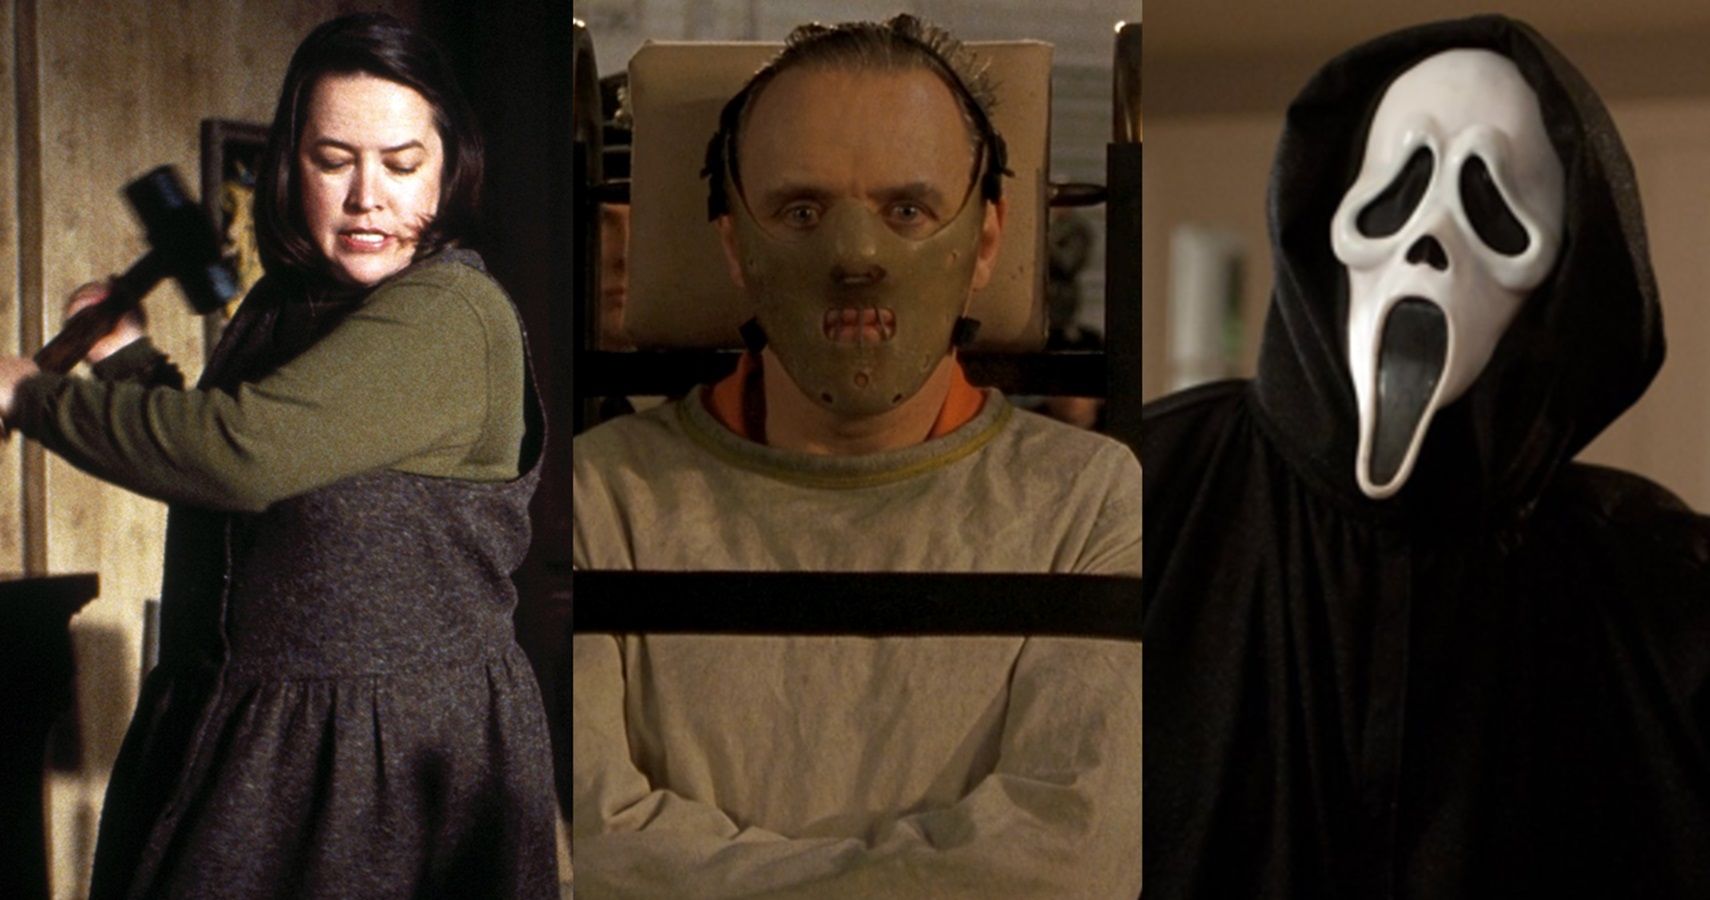 The Scariest Movie From Each Year In The '90s, Ranked